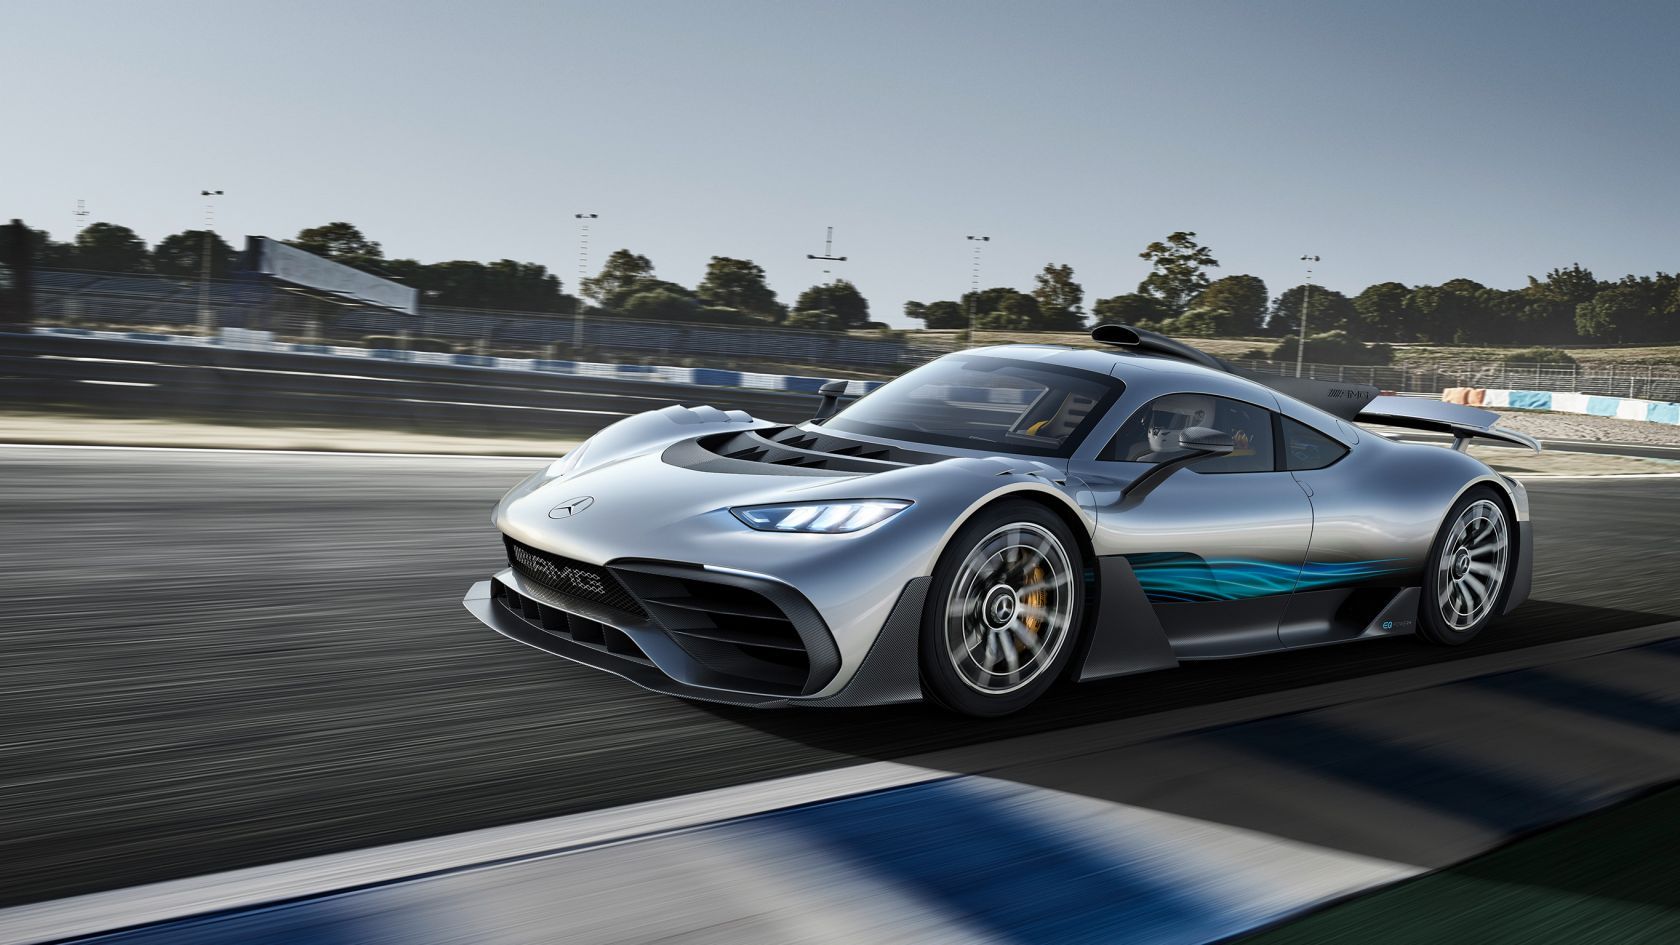 Mercedes-AMG One on the road